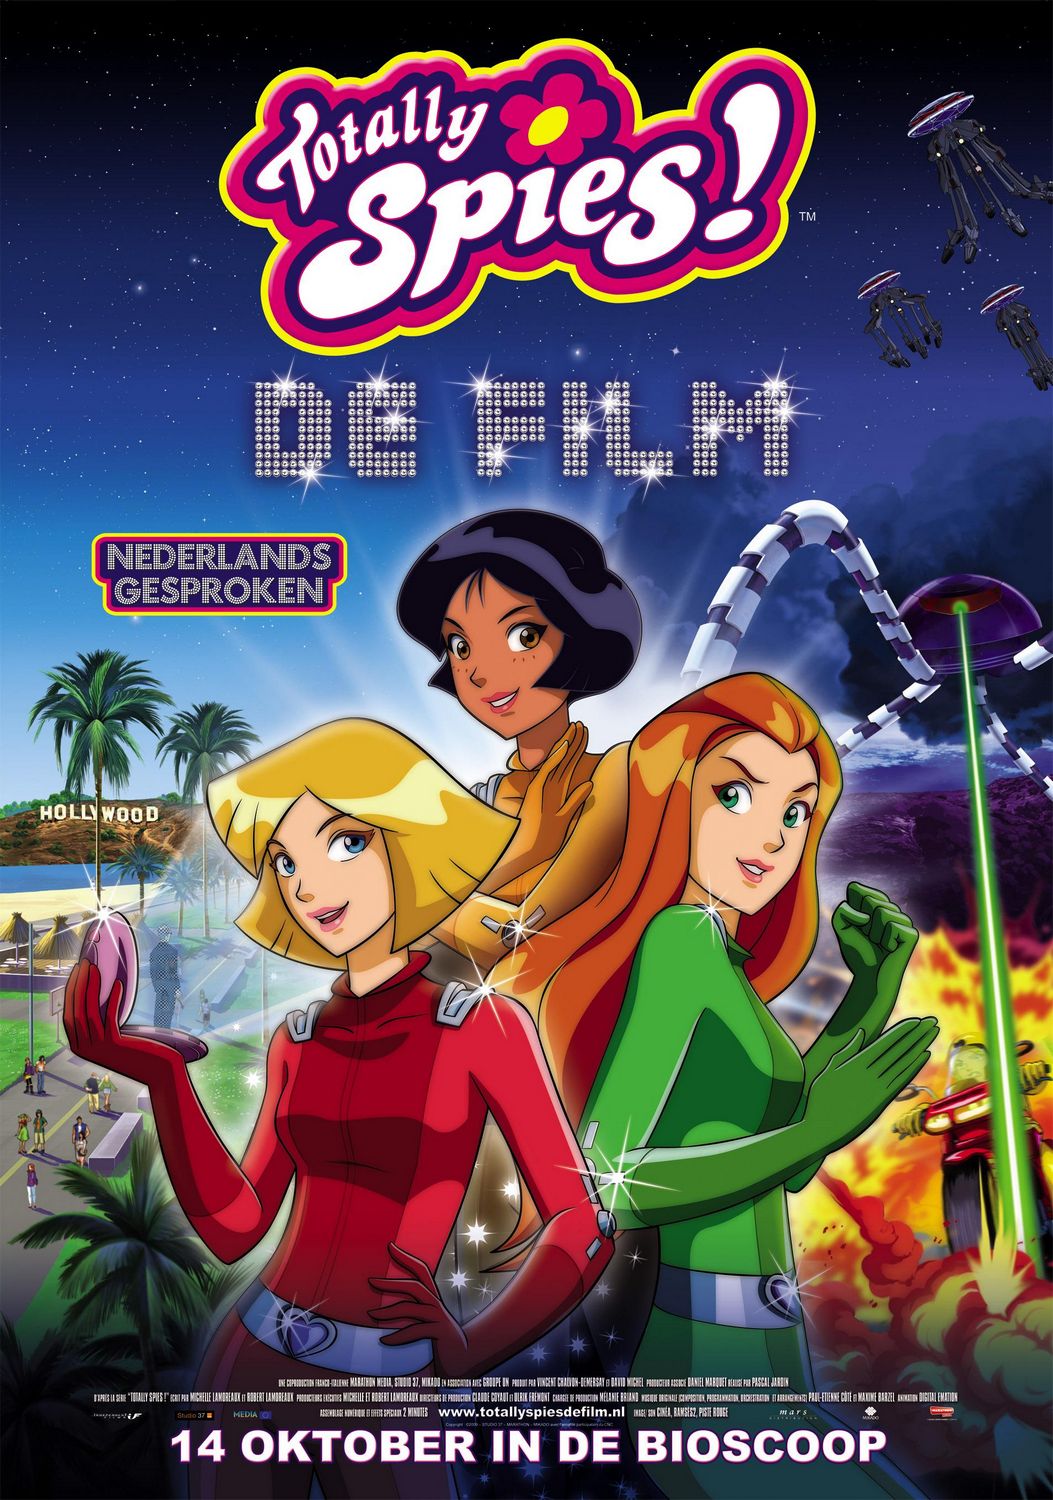 Extra Large Movie Poster Image for Totally spies! Le film (#1 of 2)